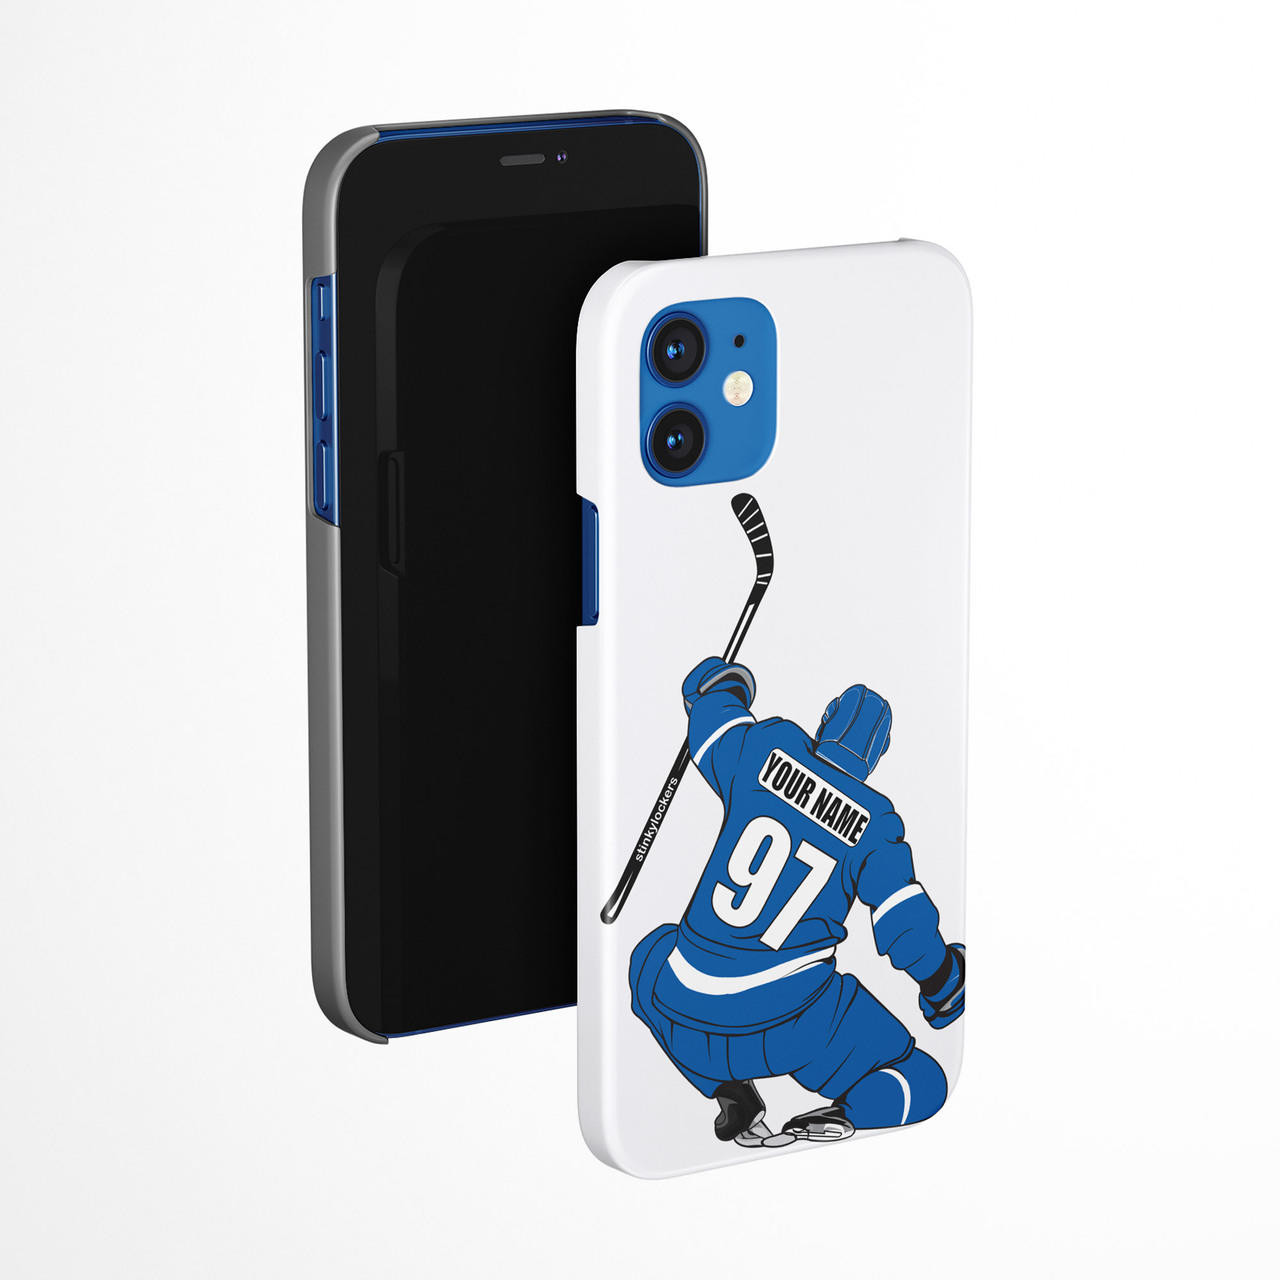 Hockey Celly Slide Sticker for your Water Bottle or Cell Phone or Laptop or Thermal Mug and More